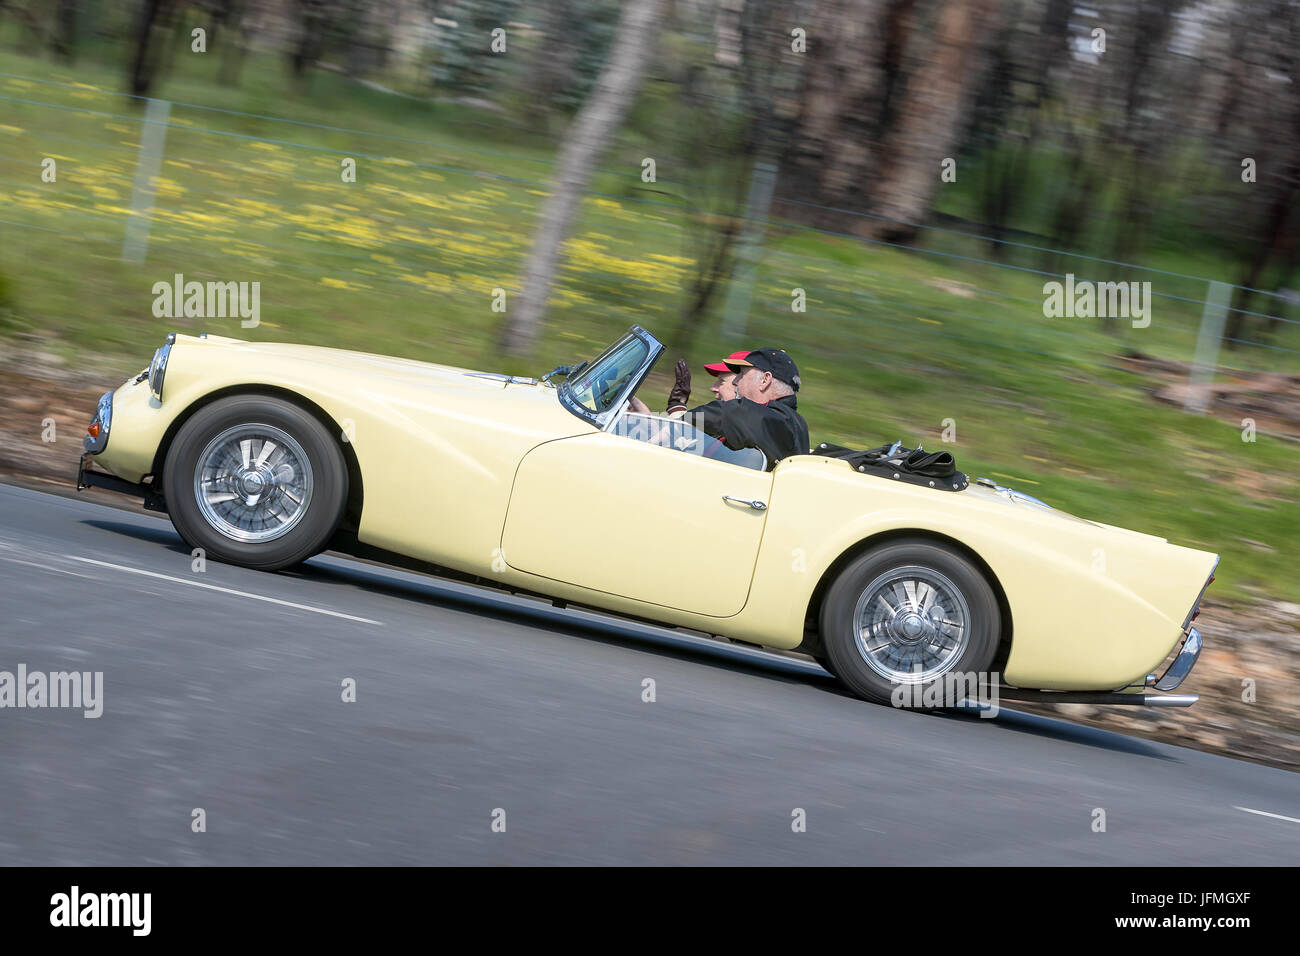 Vintage 1959 Daimler SP 250 Roadster driving on country roads near the town of Birdwood, South Australia. Stock Photo